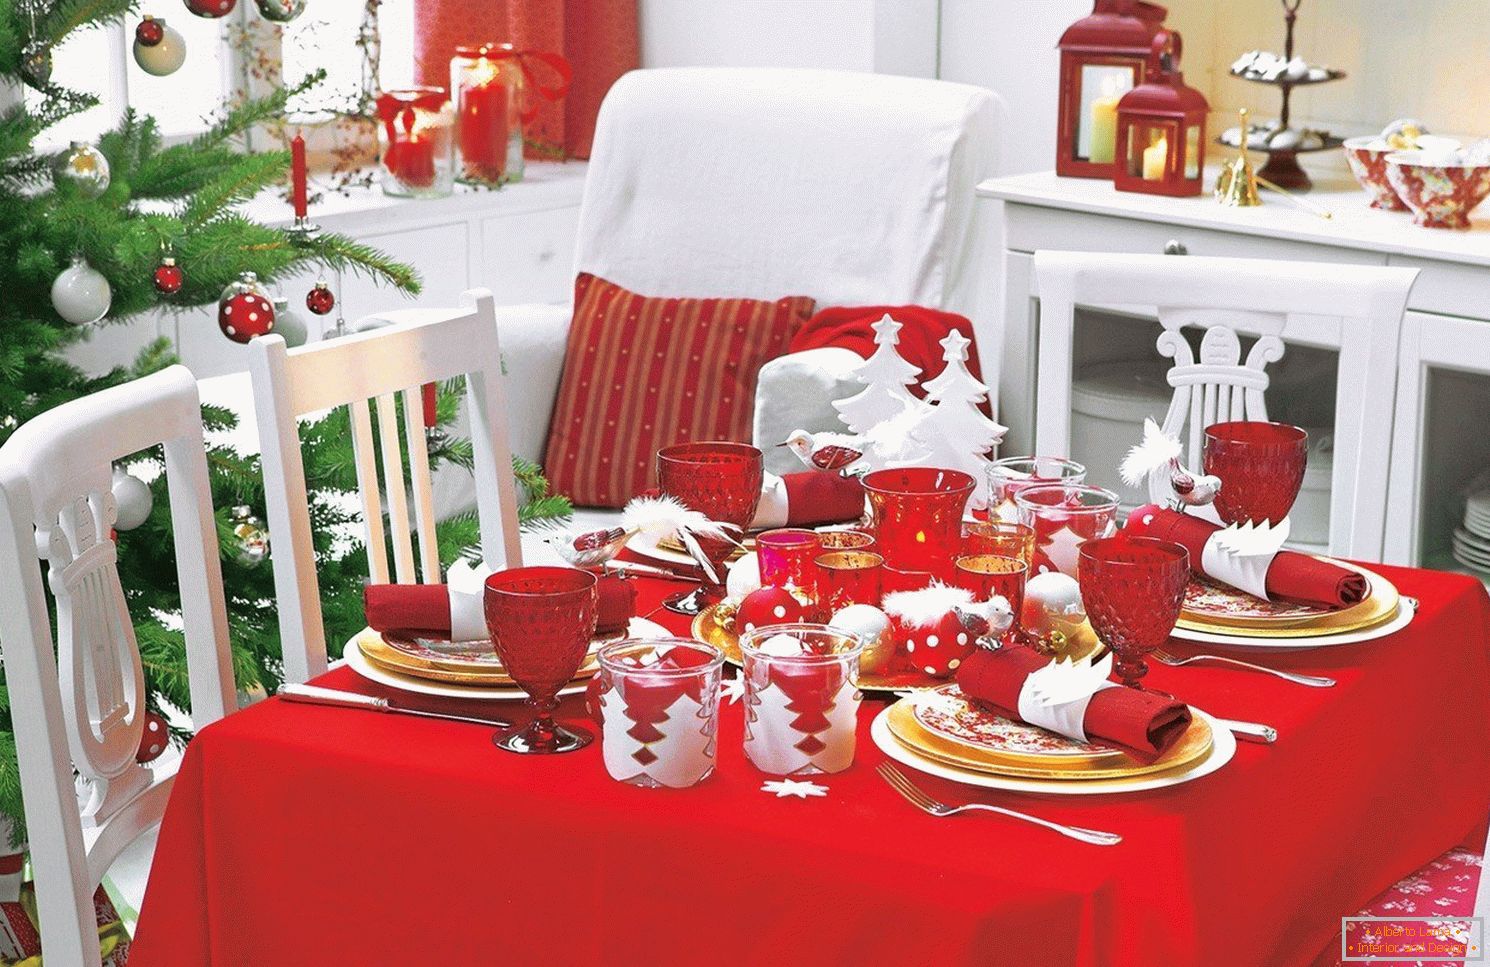 Decoration of a New Year's table in red color